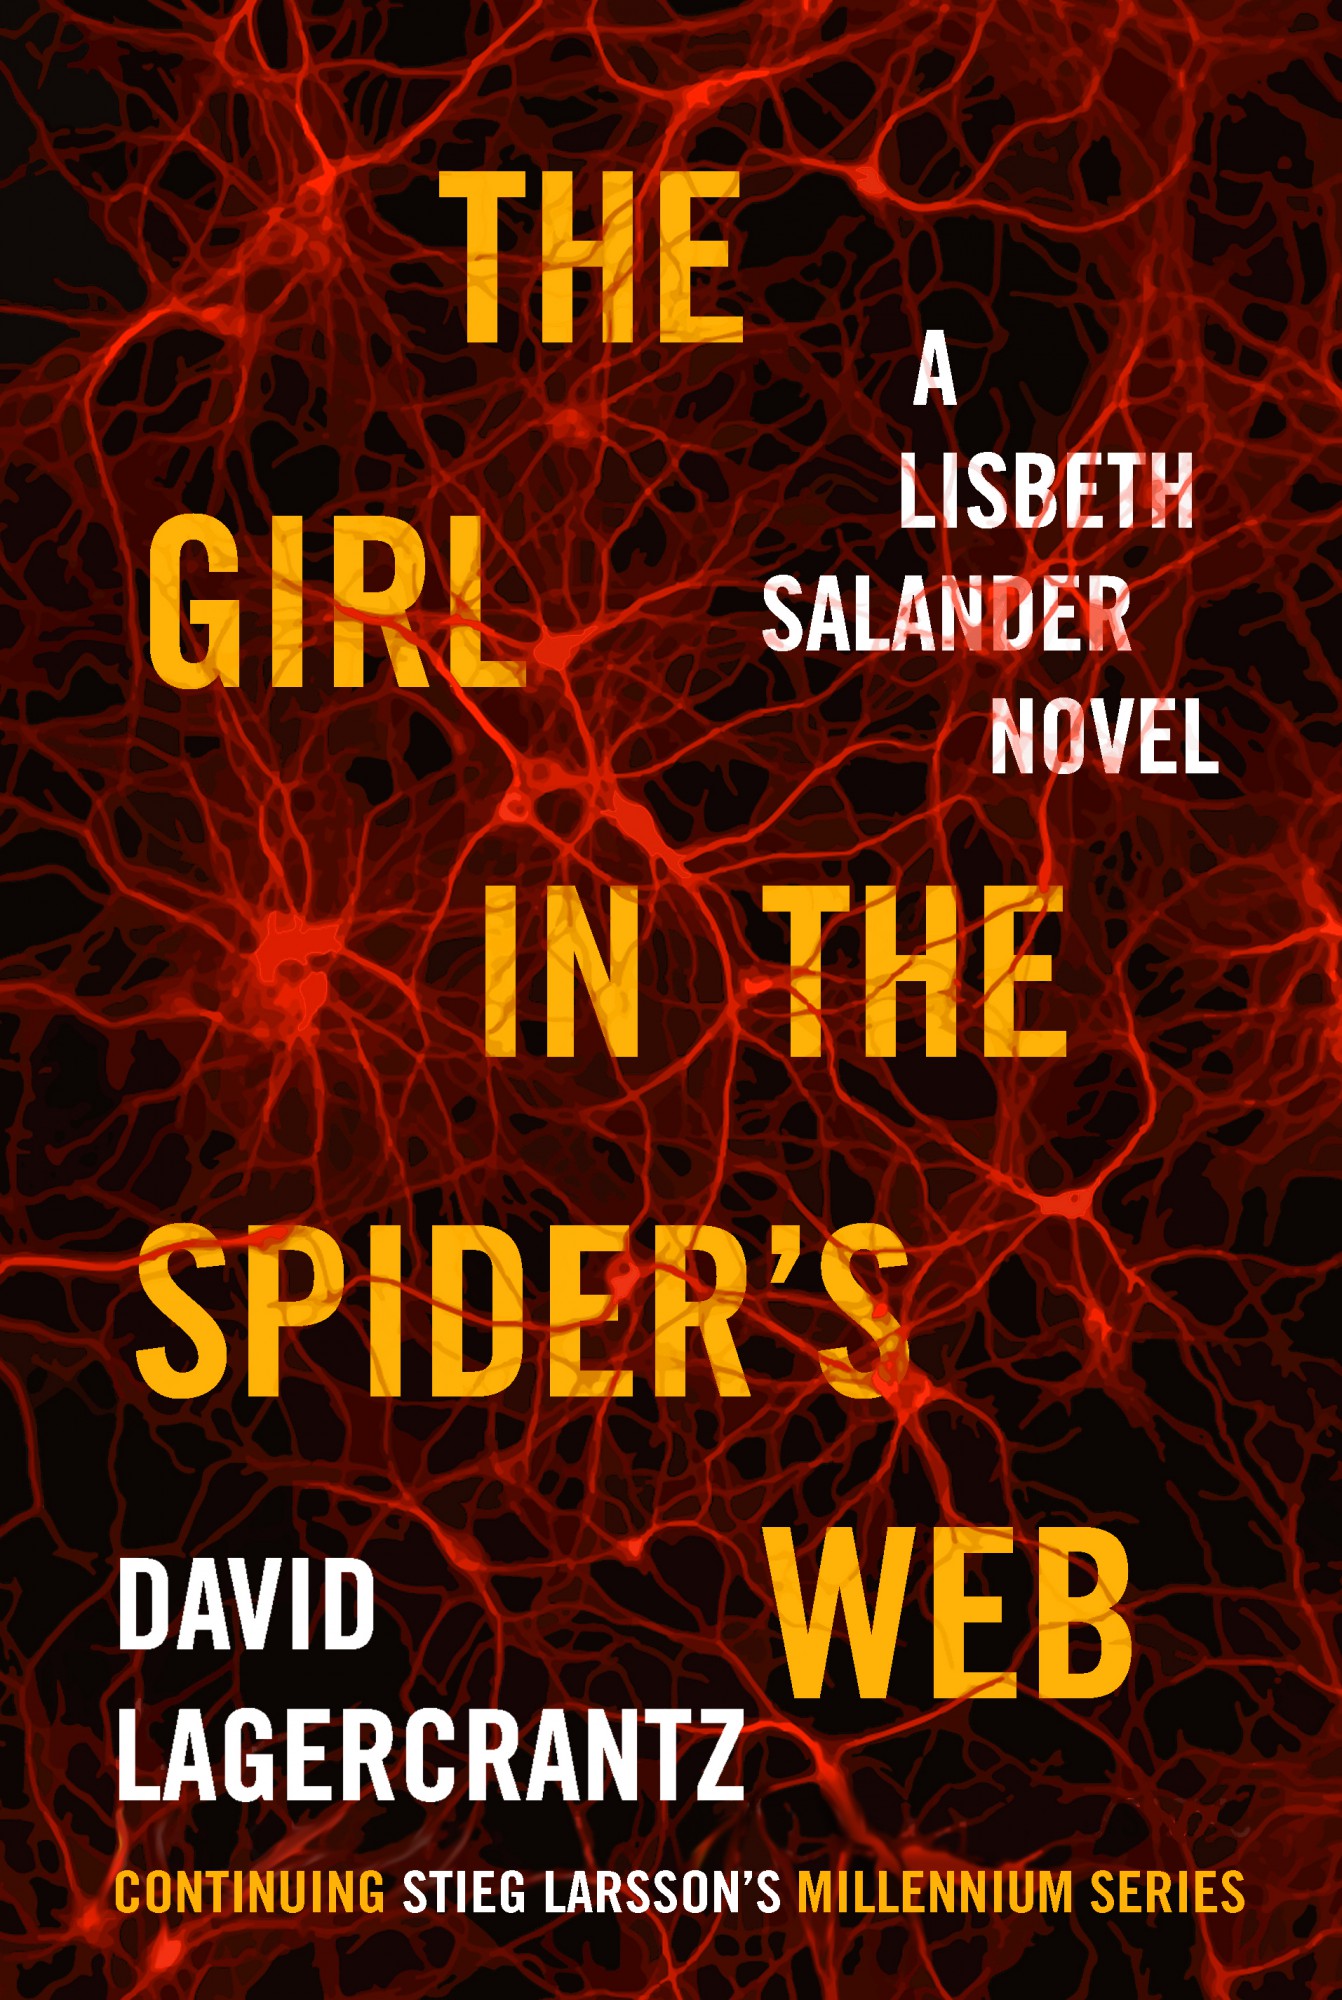 The Girl in the Spider's Web cover. Novel by David Lagercrantz